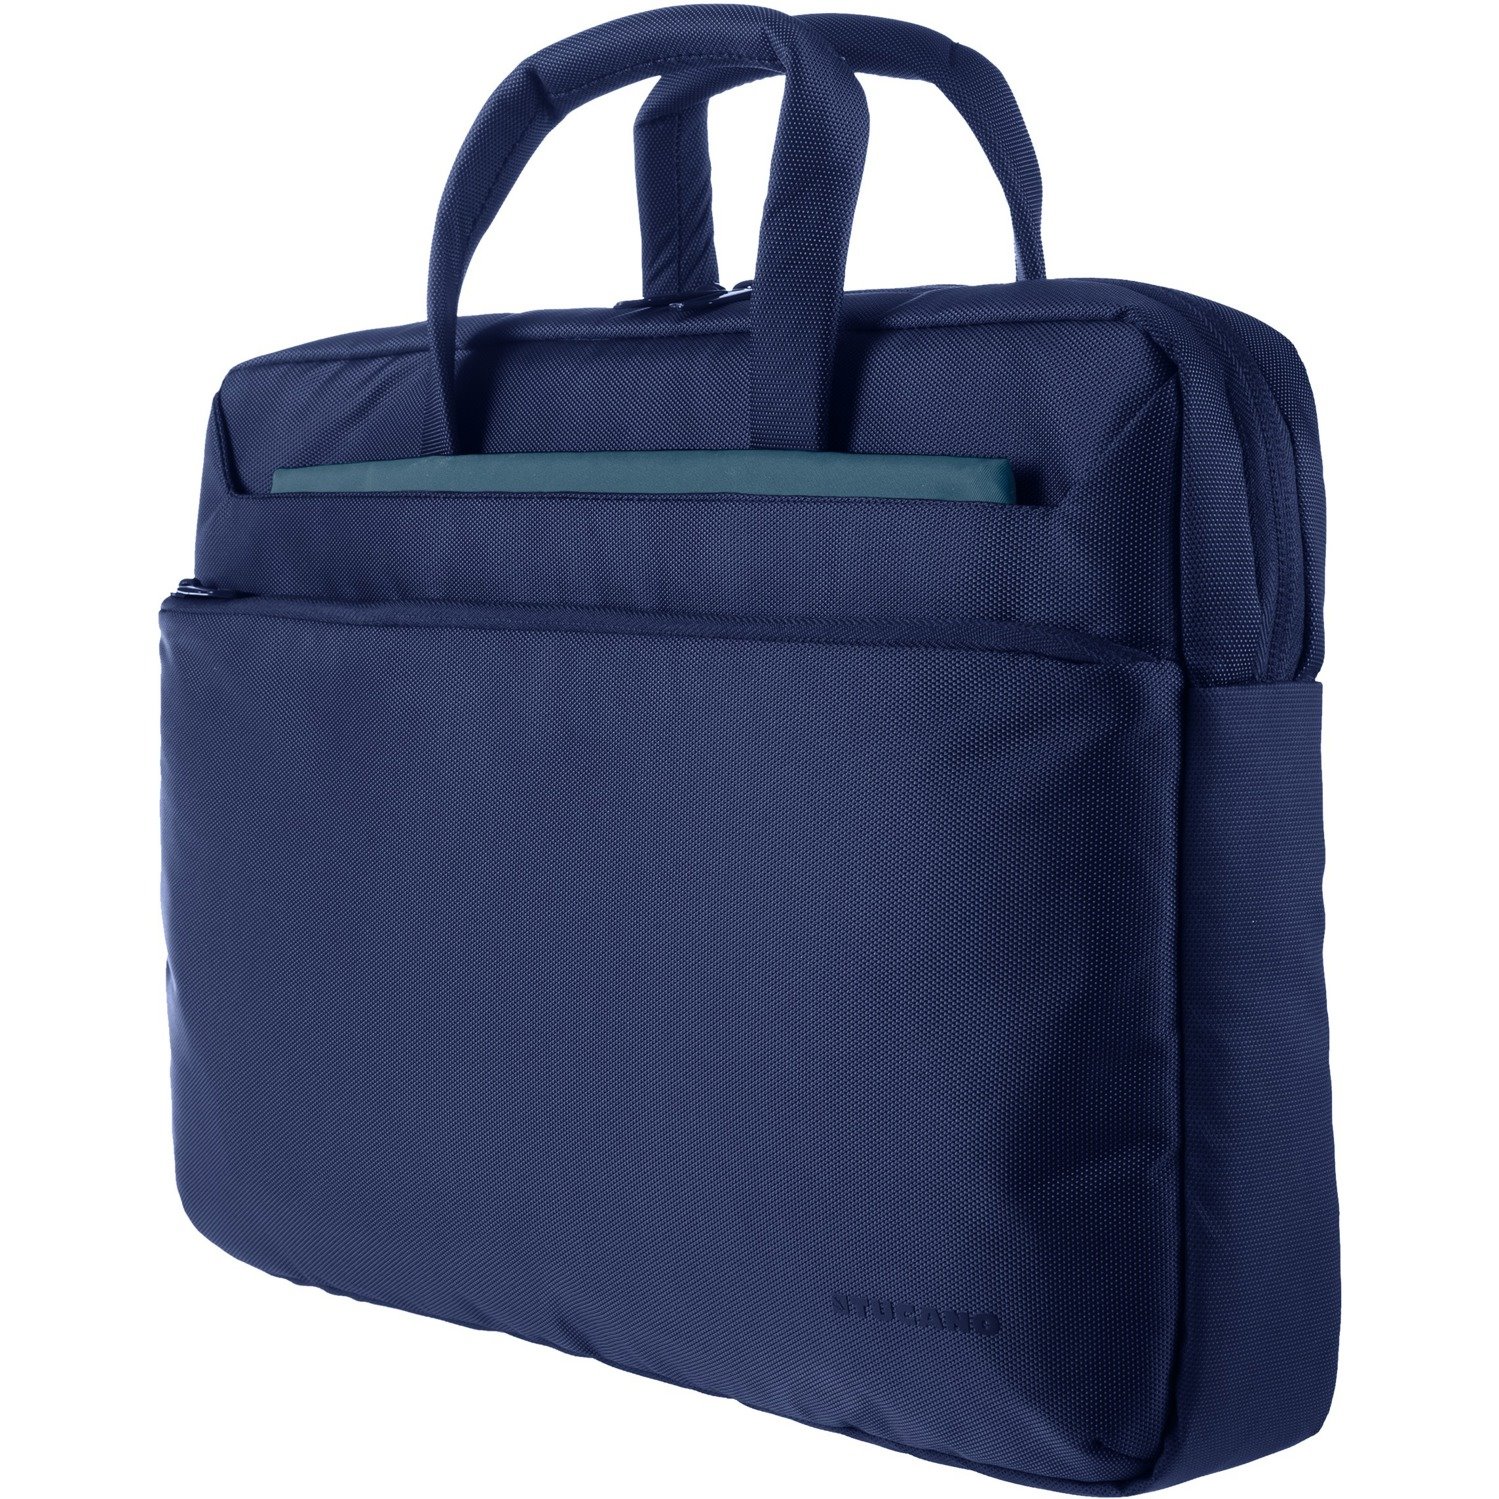 Tucano Work_Out 3 Carrying Case for 33 cm (13") MacBook Pro (Retina Display) - Blue